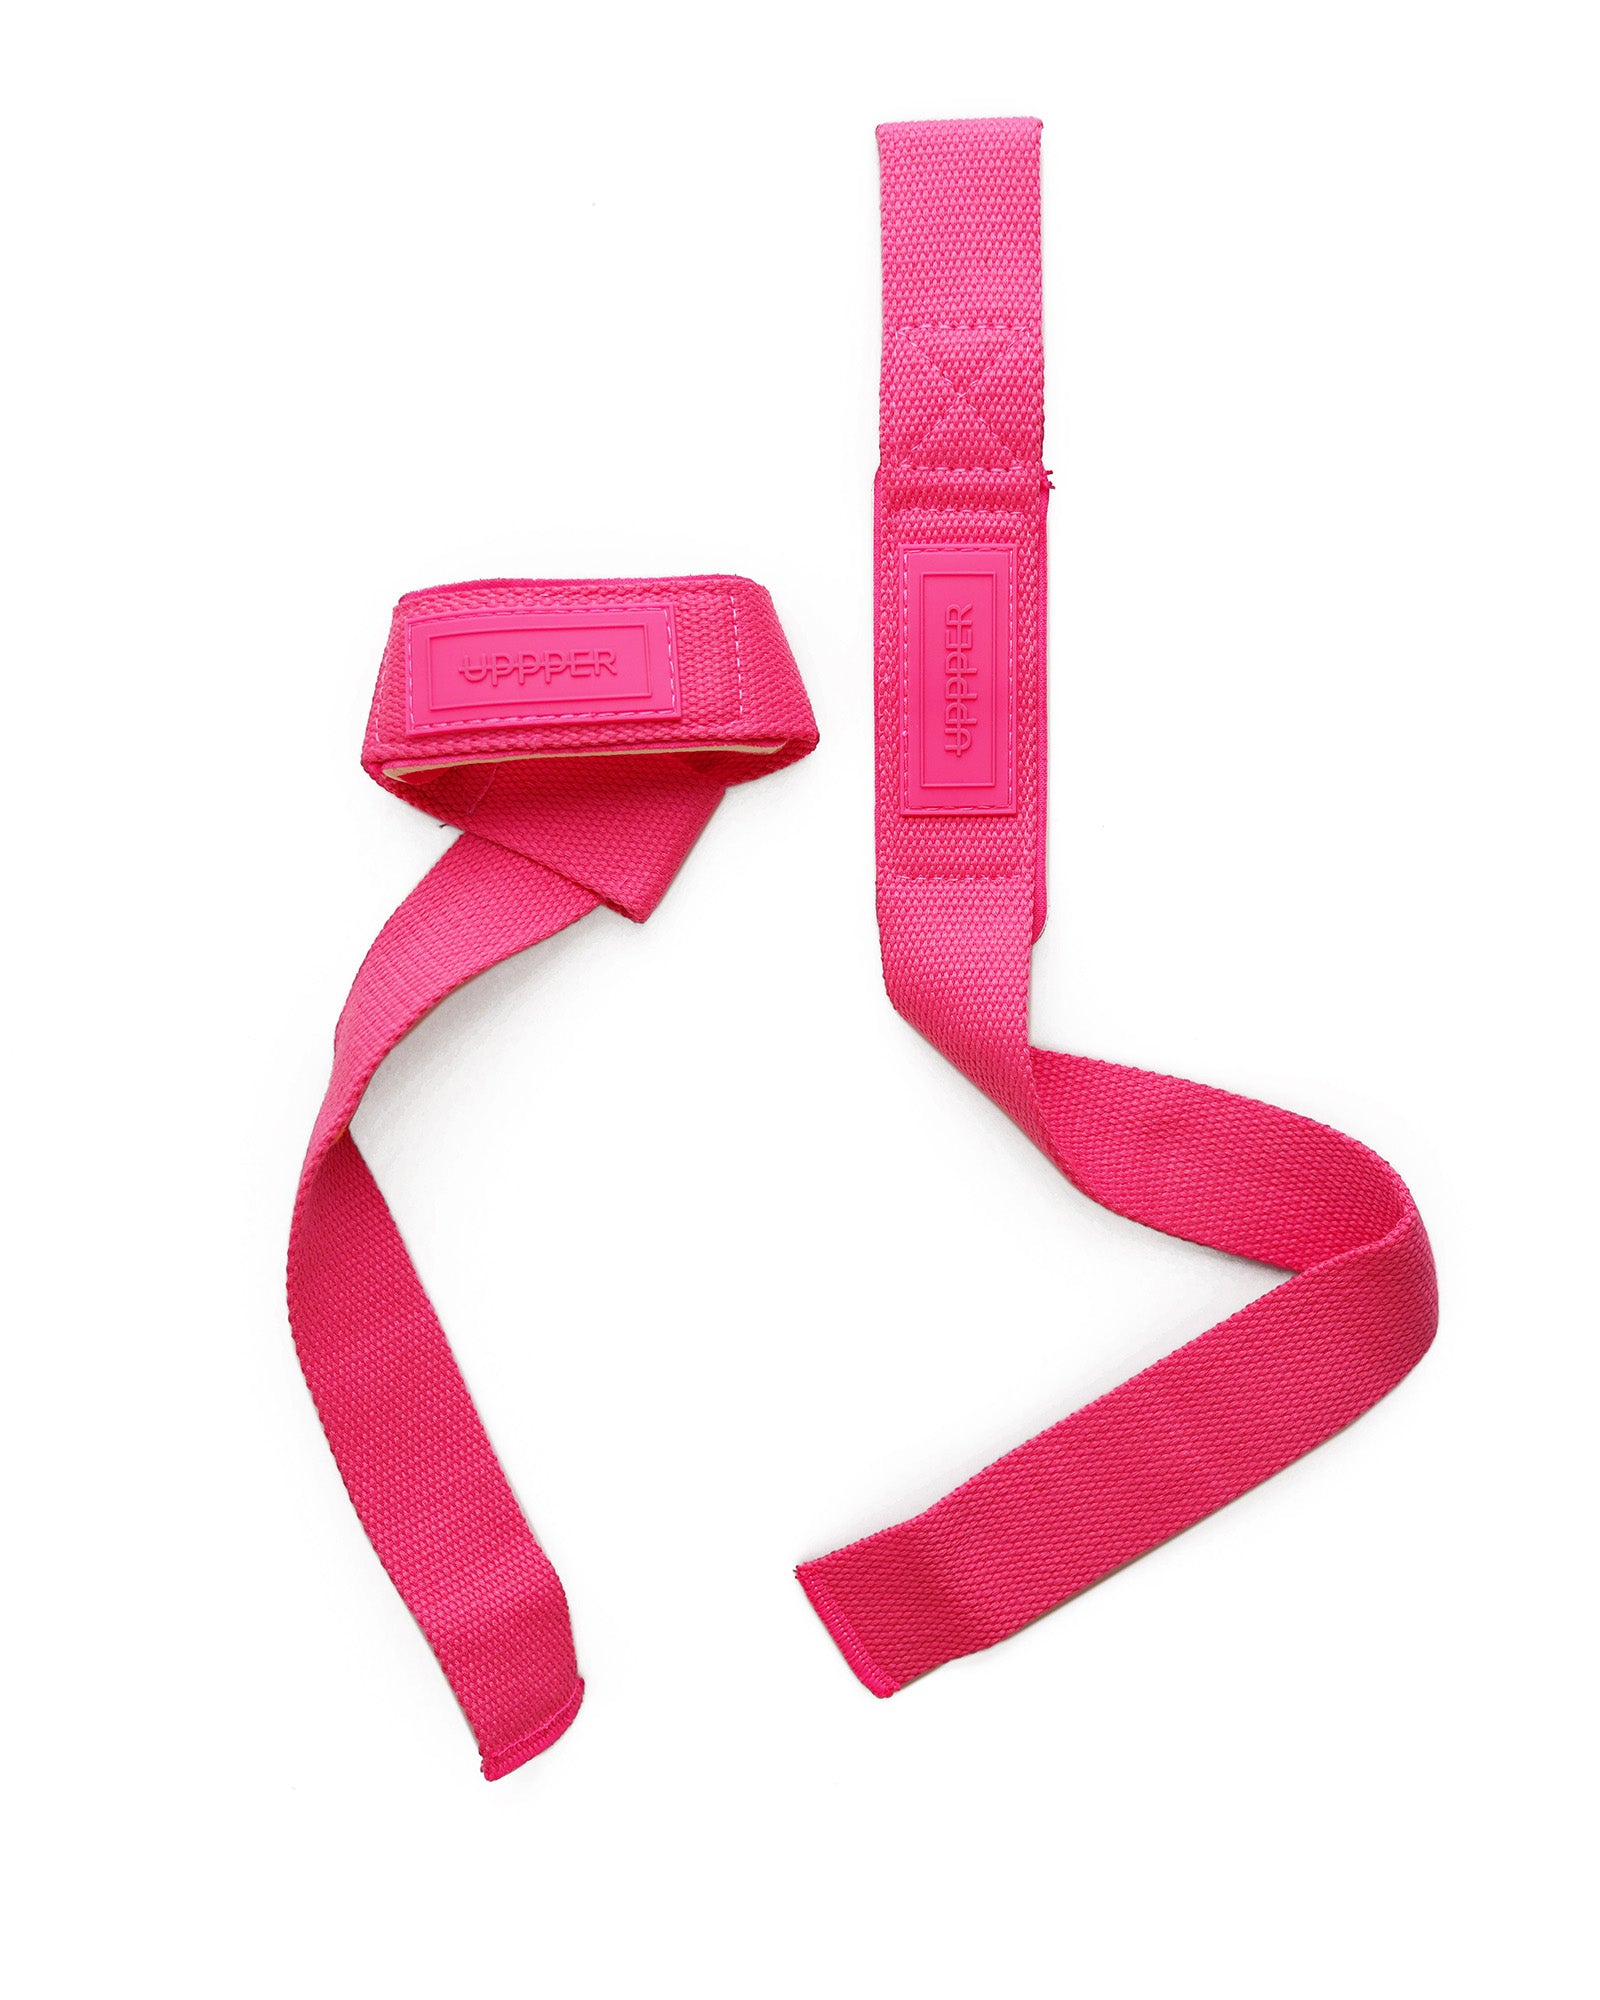 Olympic Lifting Straps | REP Fitness | Weightlifting